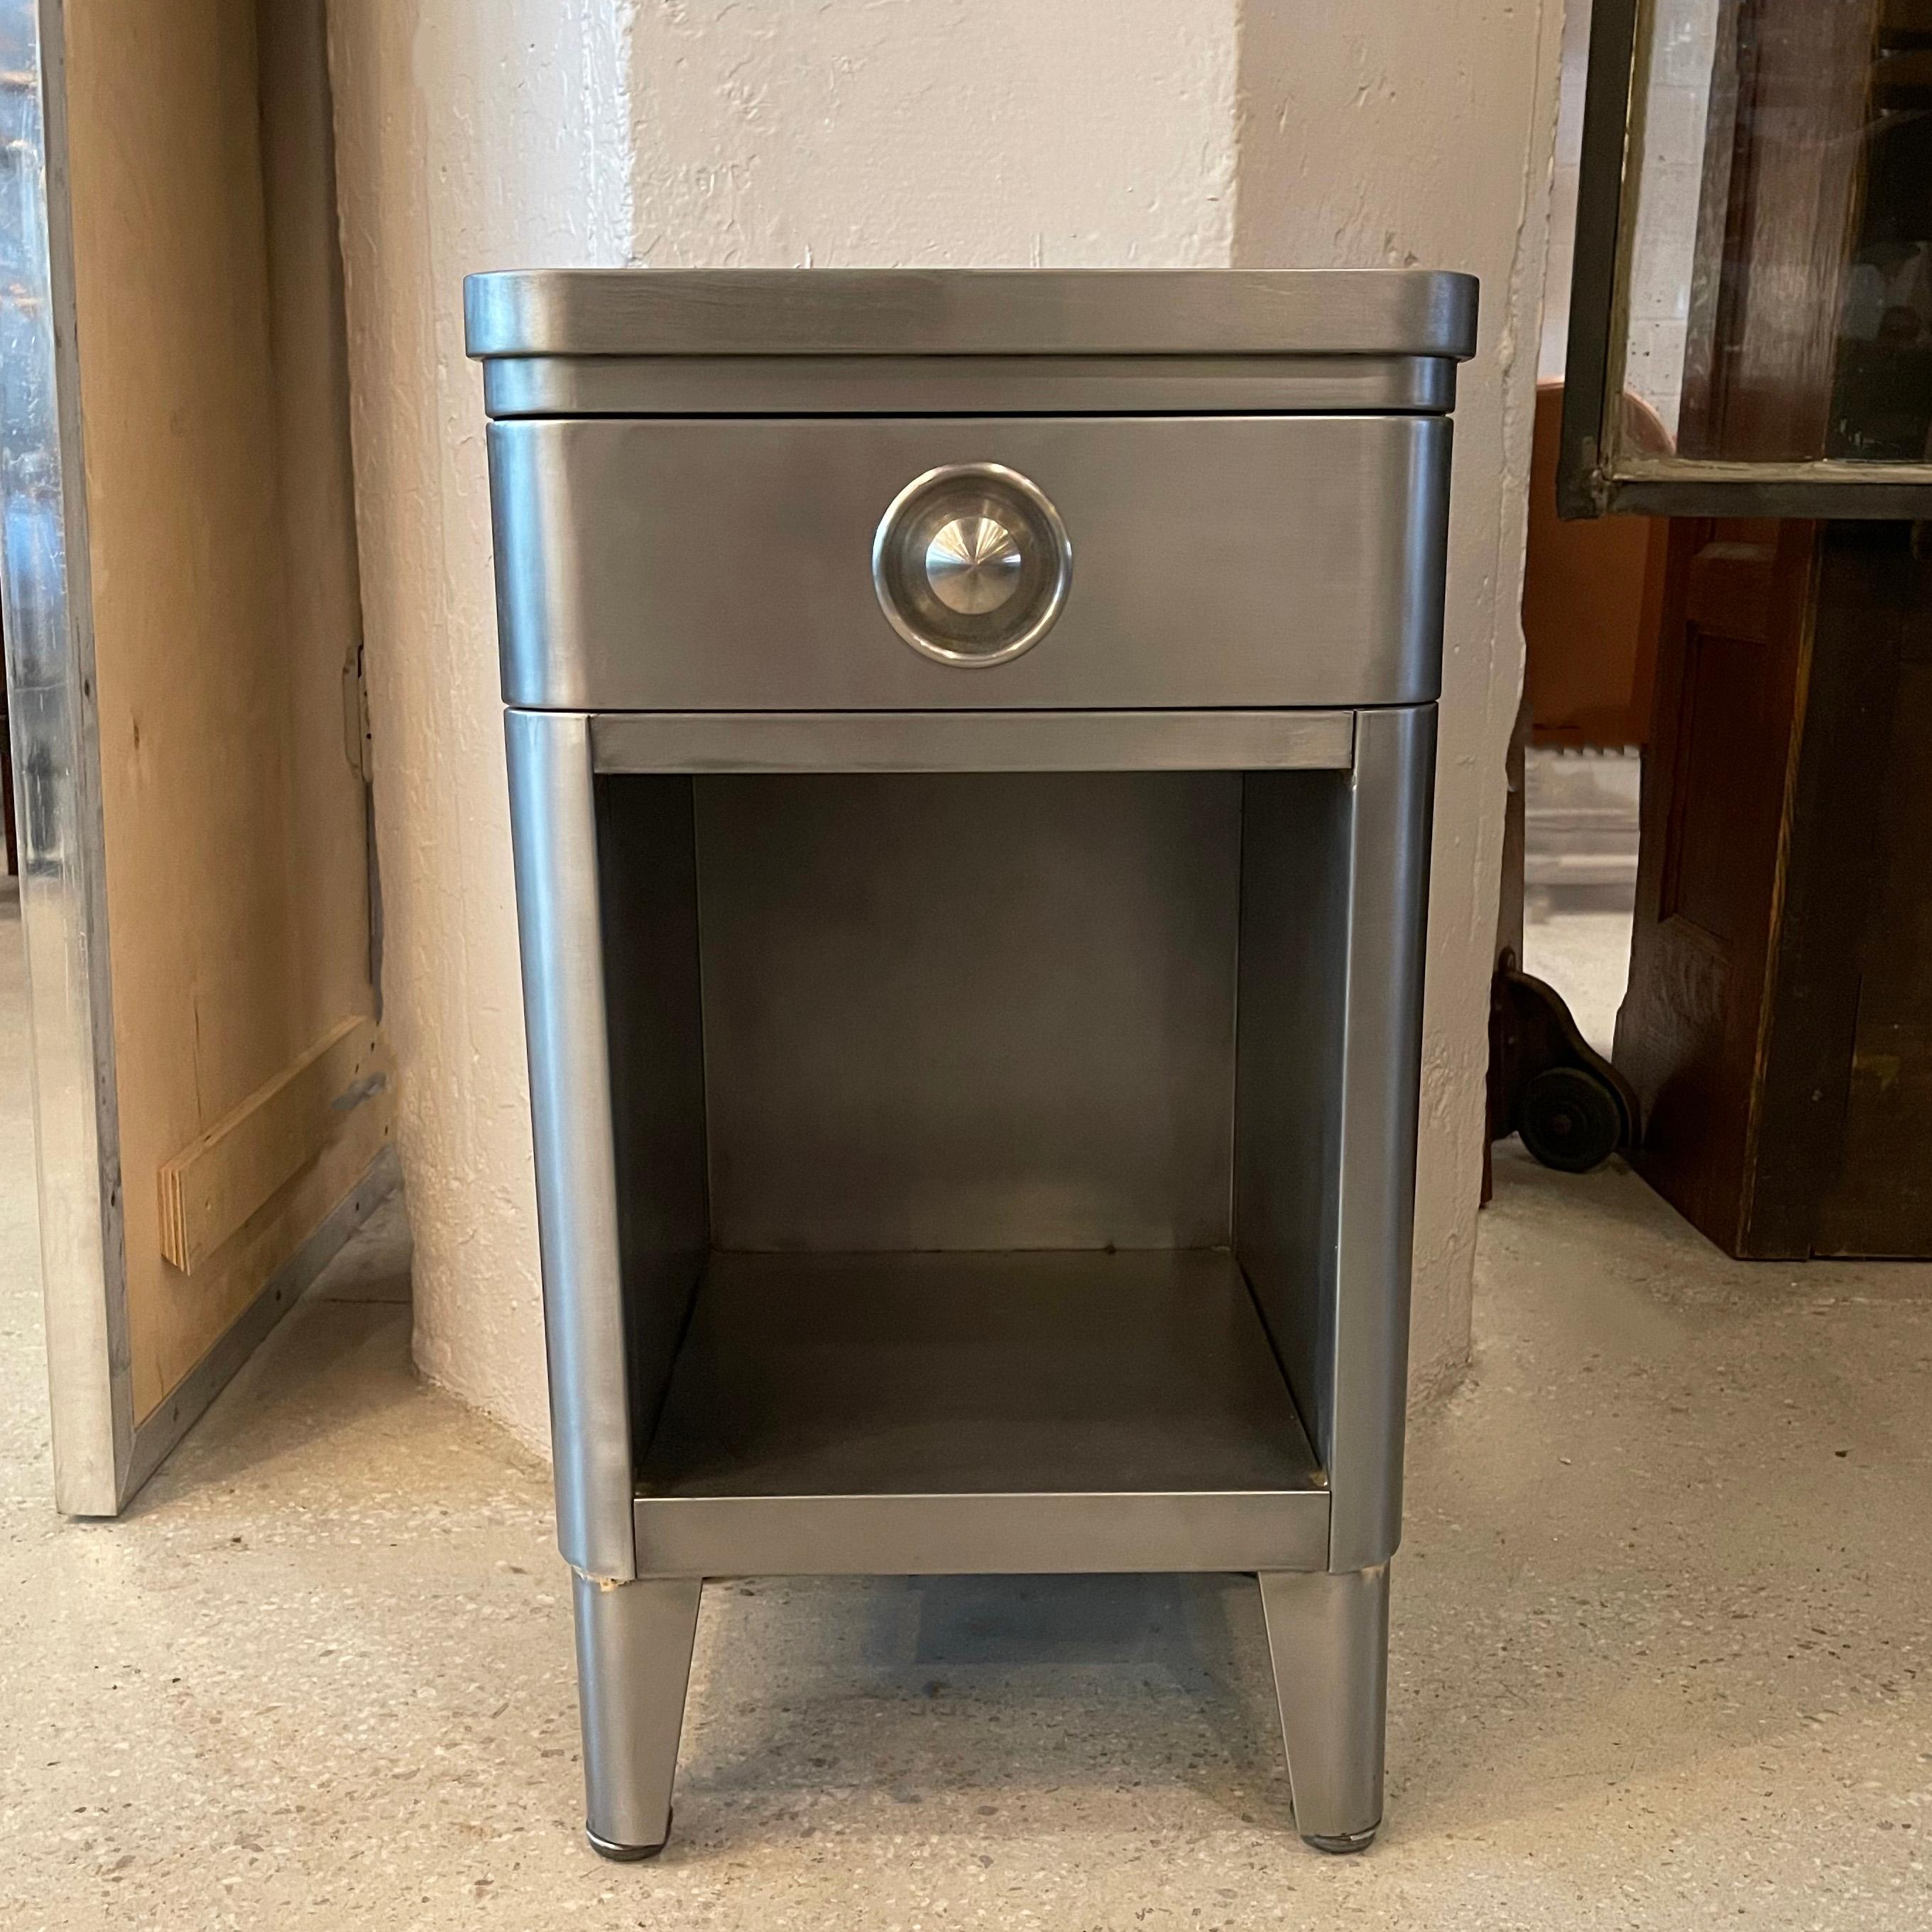 Machine-age, brushed steel nightstand or end table by Norman Bel Geddes for Simmons Company Furniture features a 3 inch height, top drawer and 13 inch, open storage below.